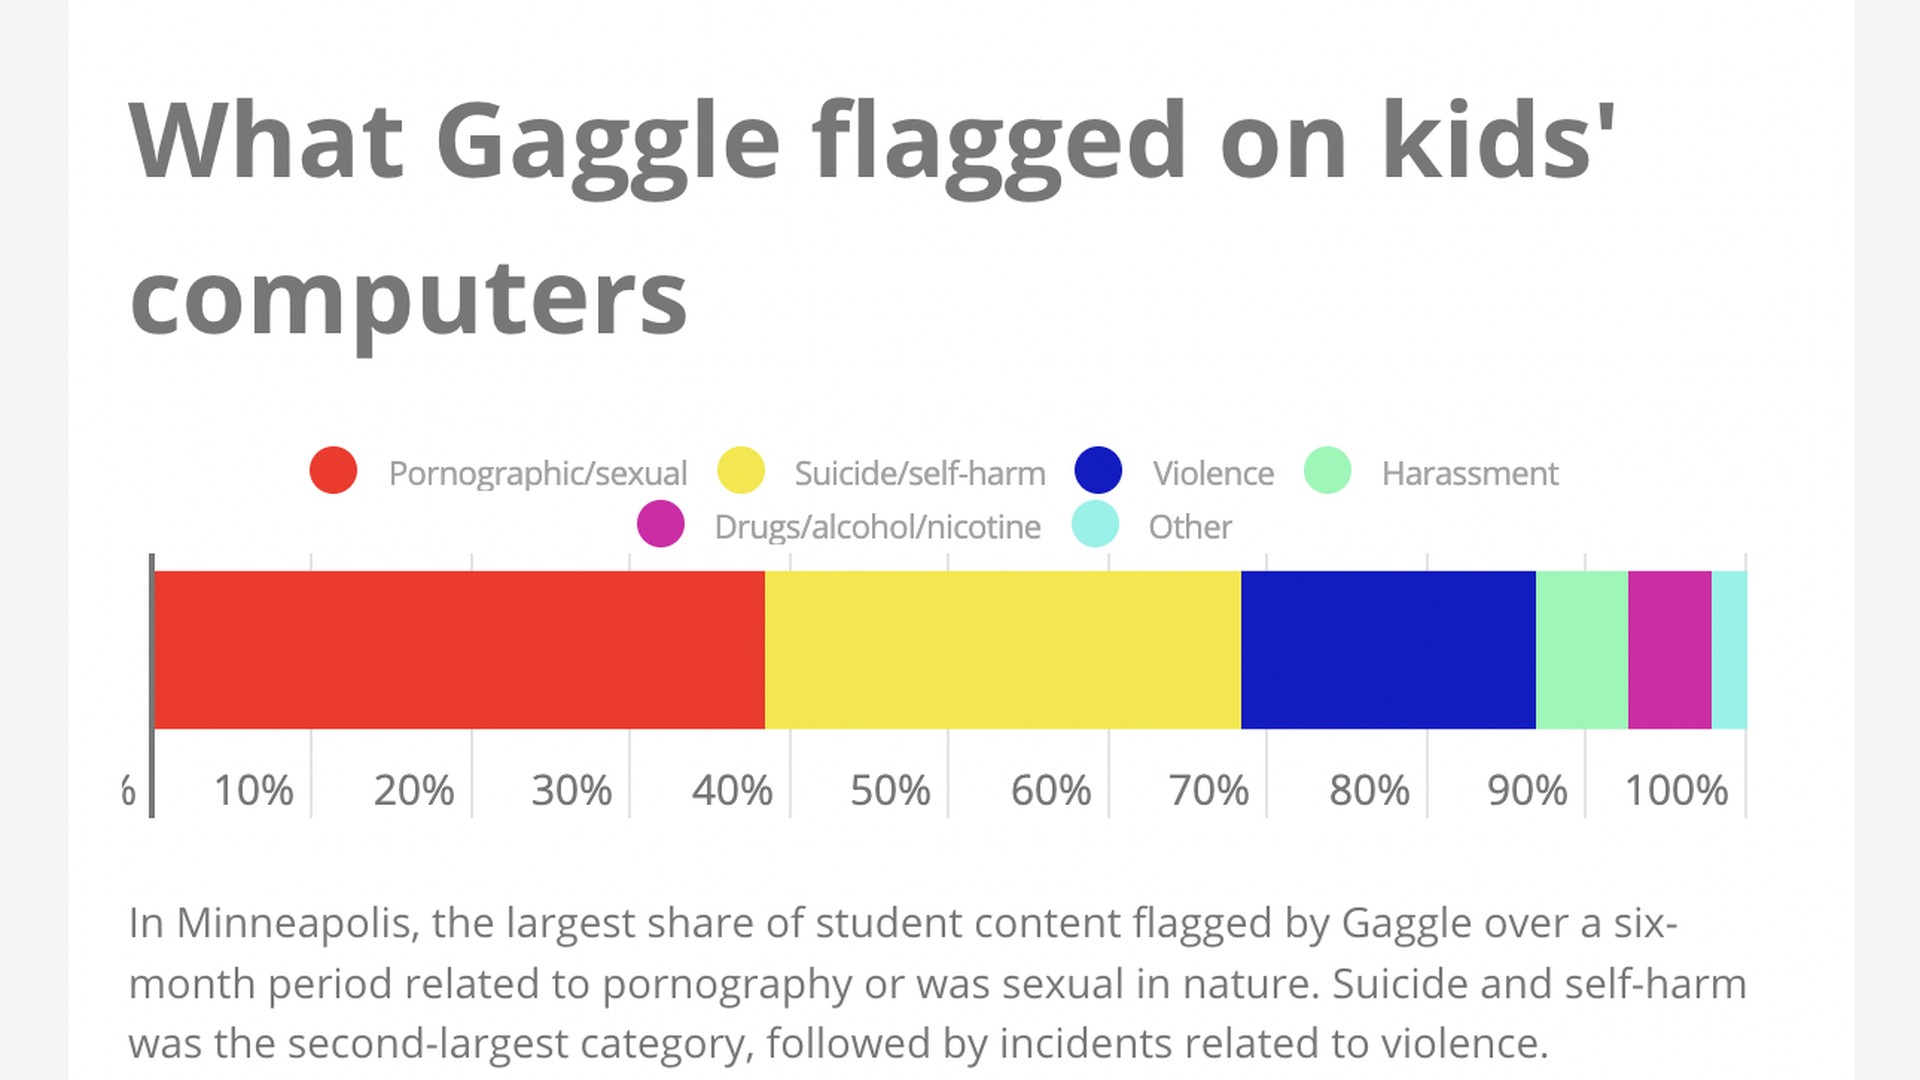 A chart showing the different types of content Gaggle flags